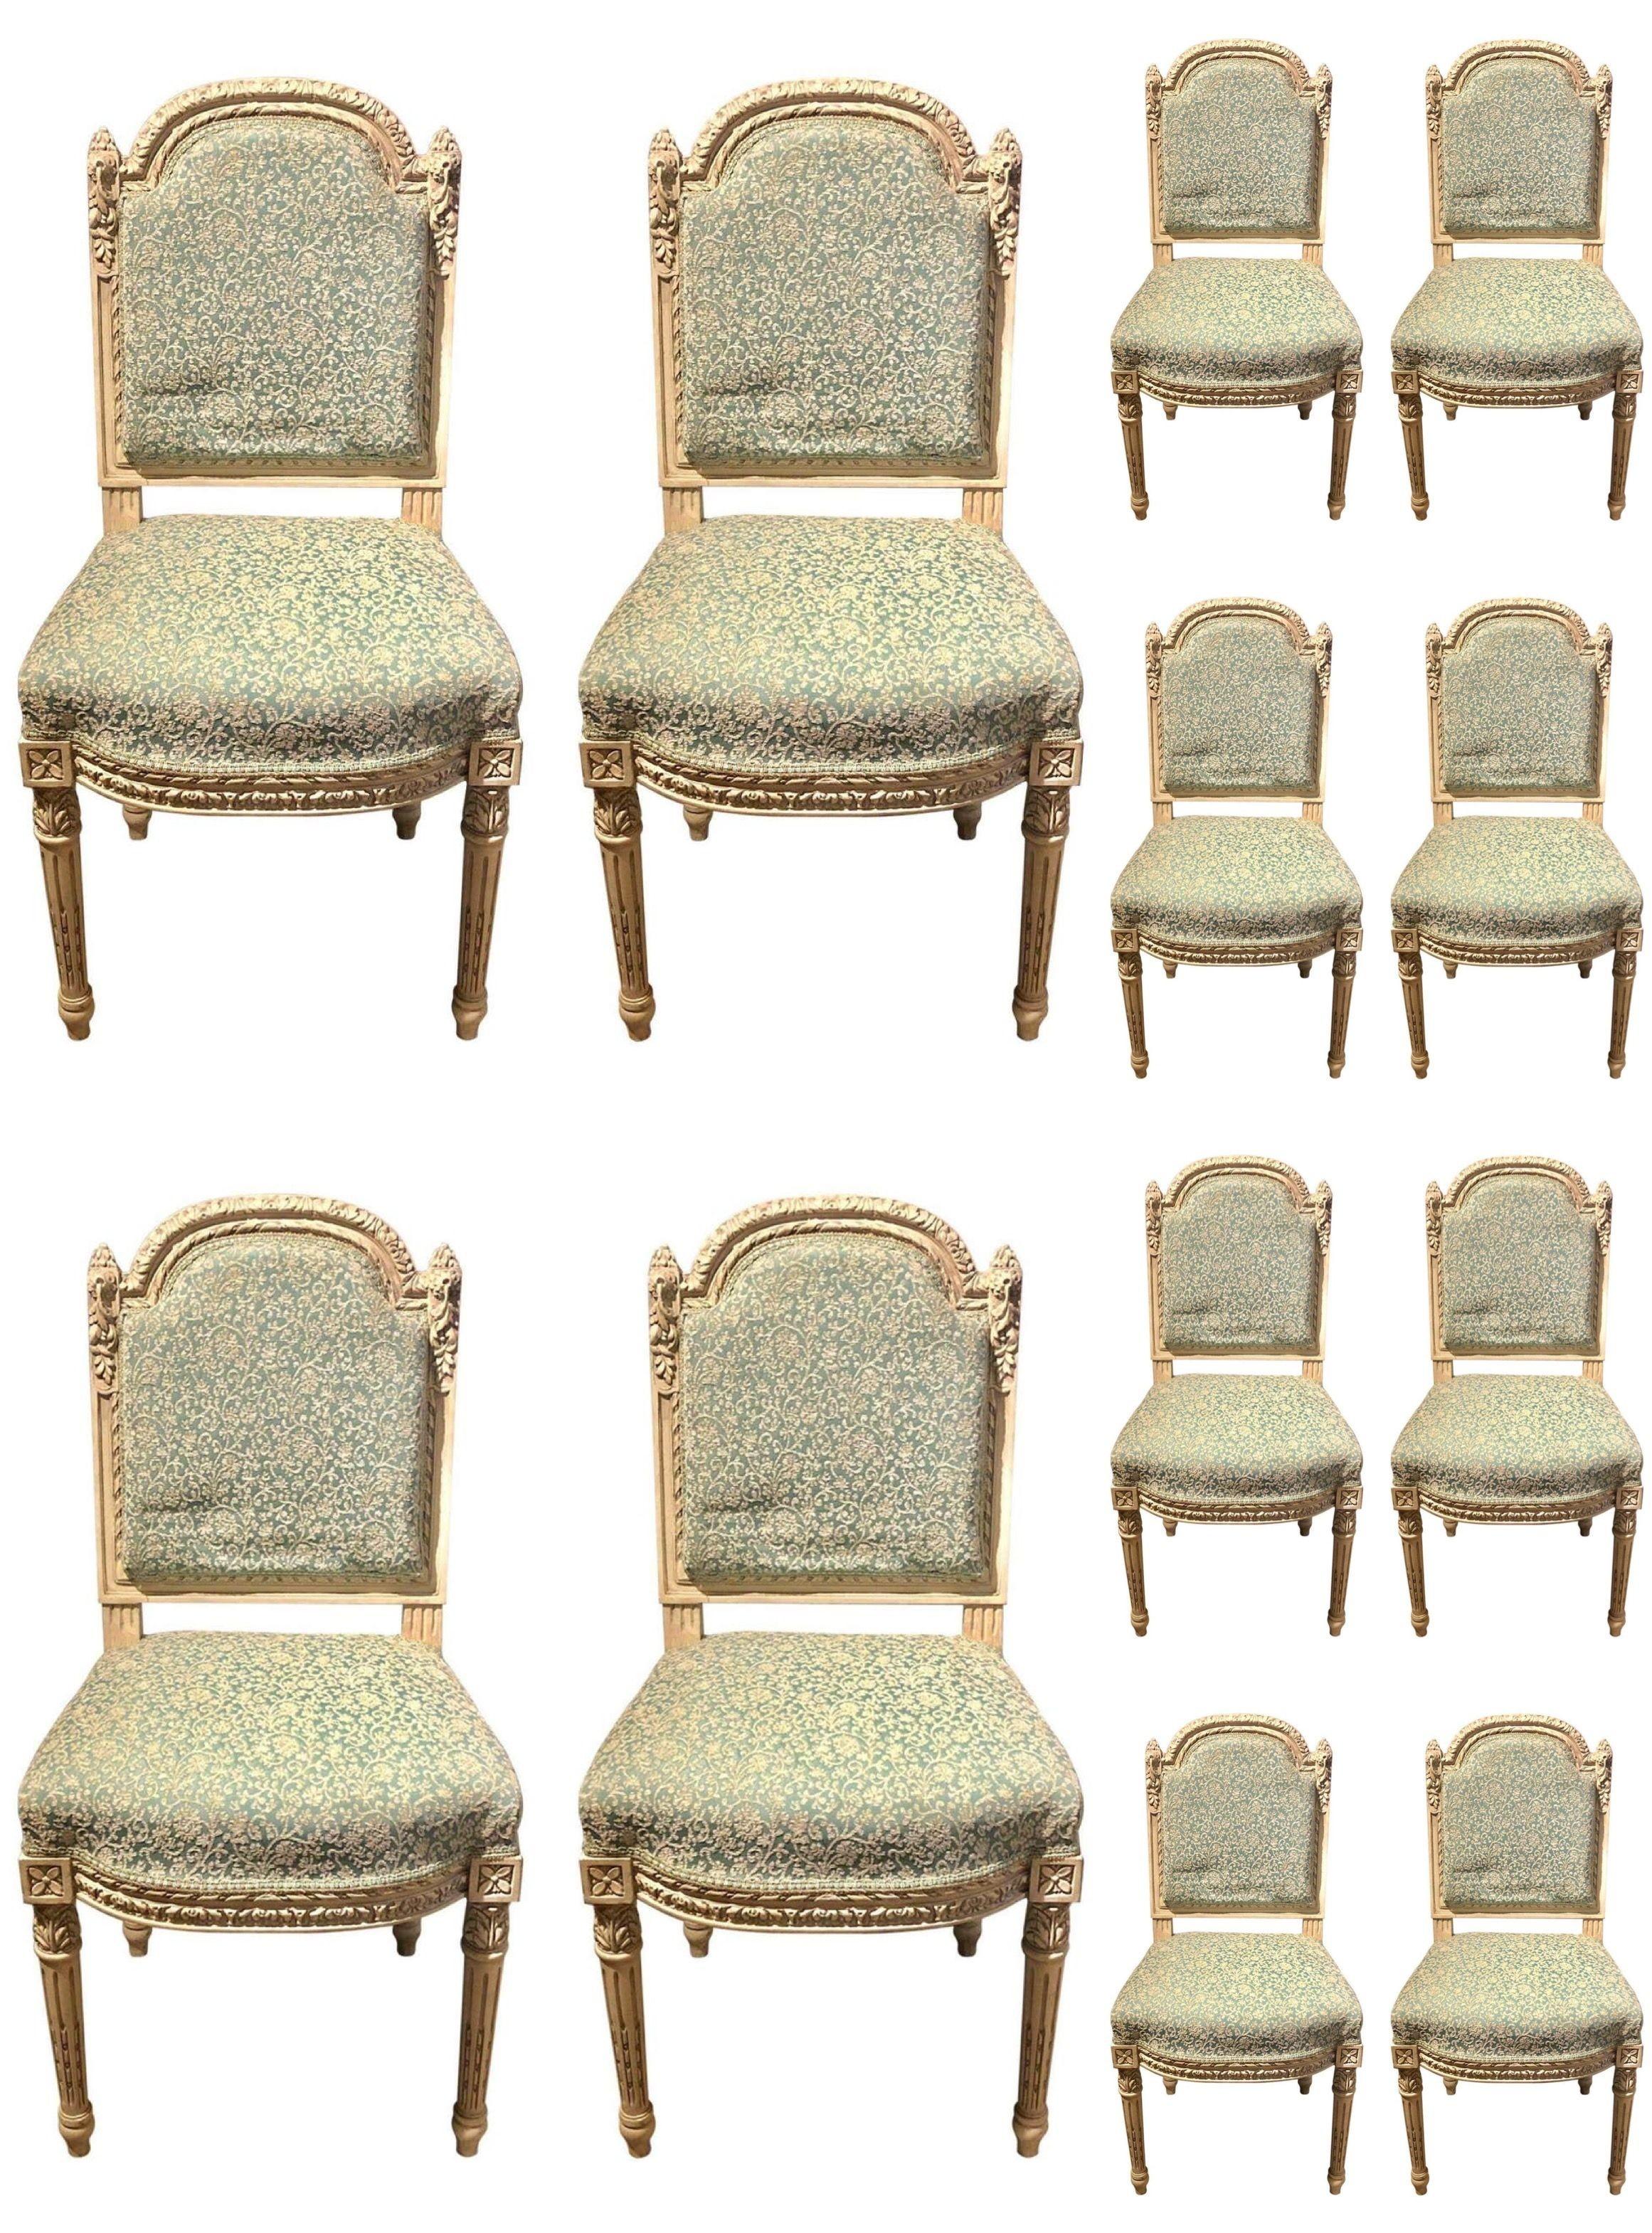 Set of Ten Paint Decorated Louis XVI Style Dining / Side Chairs, Finely Carved

 From our original, stunning set of 24 dining chairs, this listing is for 10 pieces which currently remain available and have been fully refinished and reupholstered.